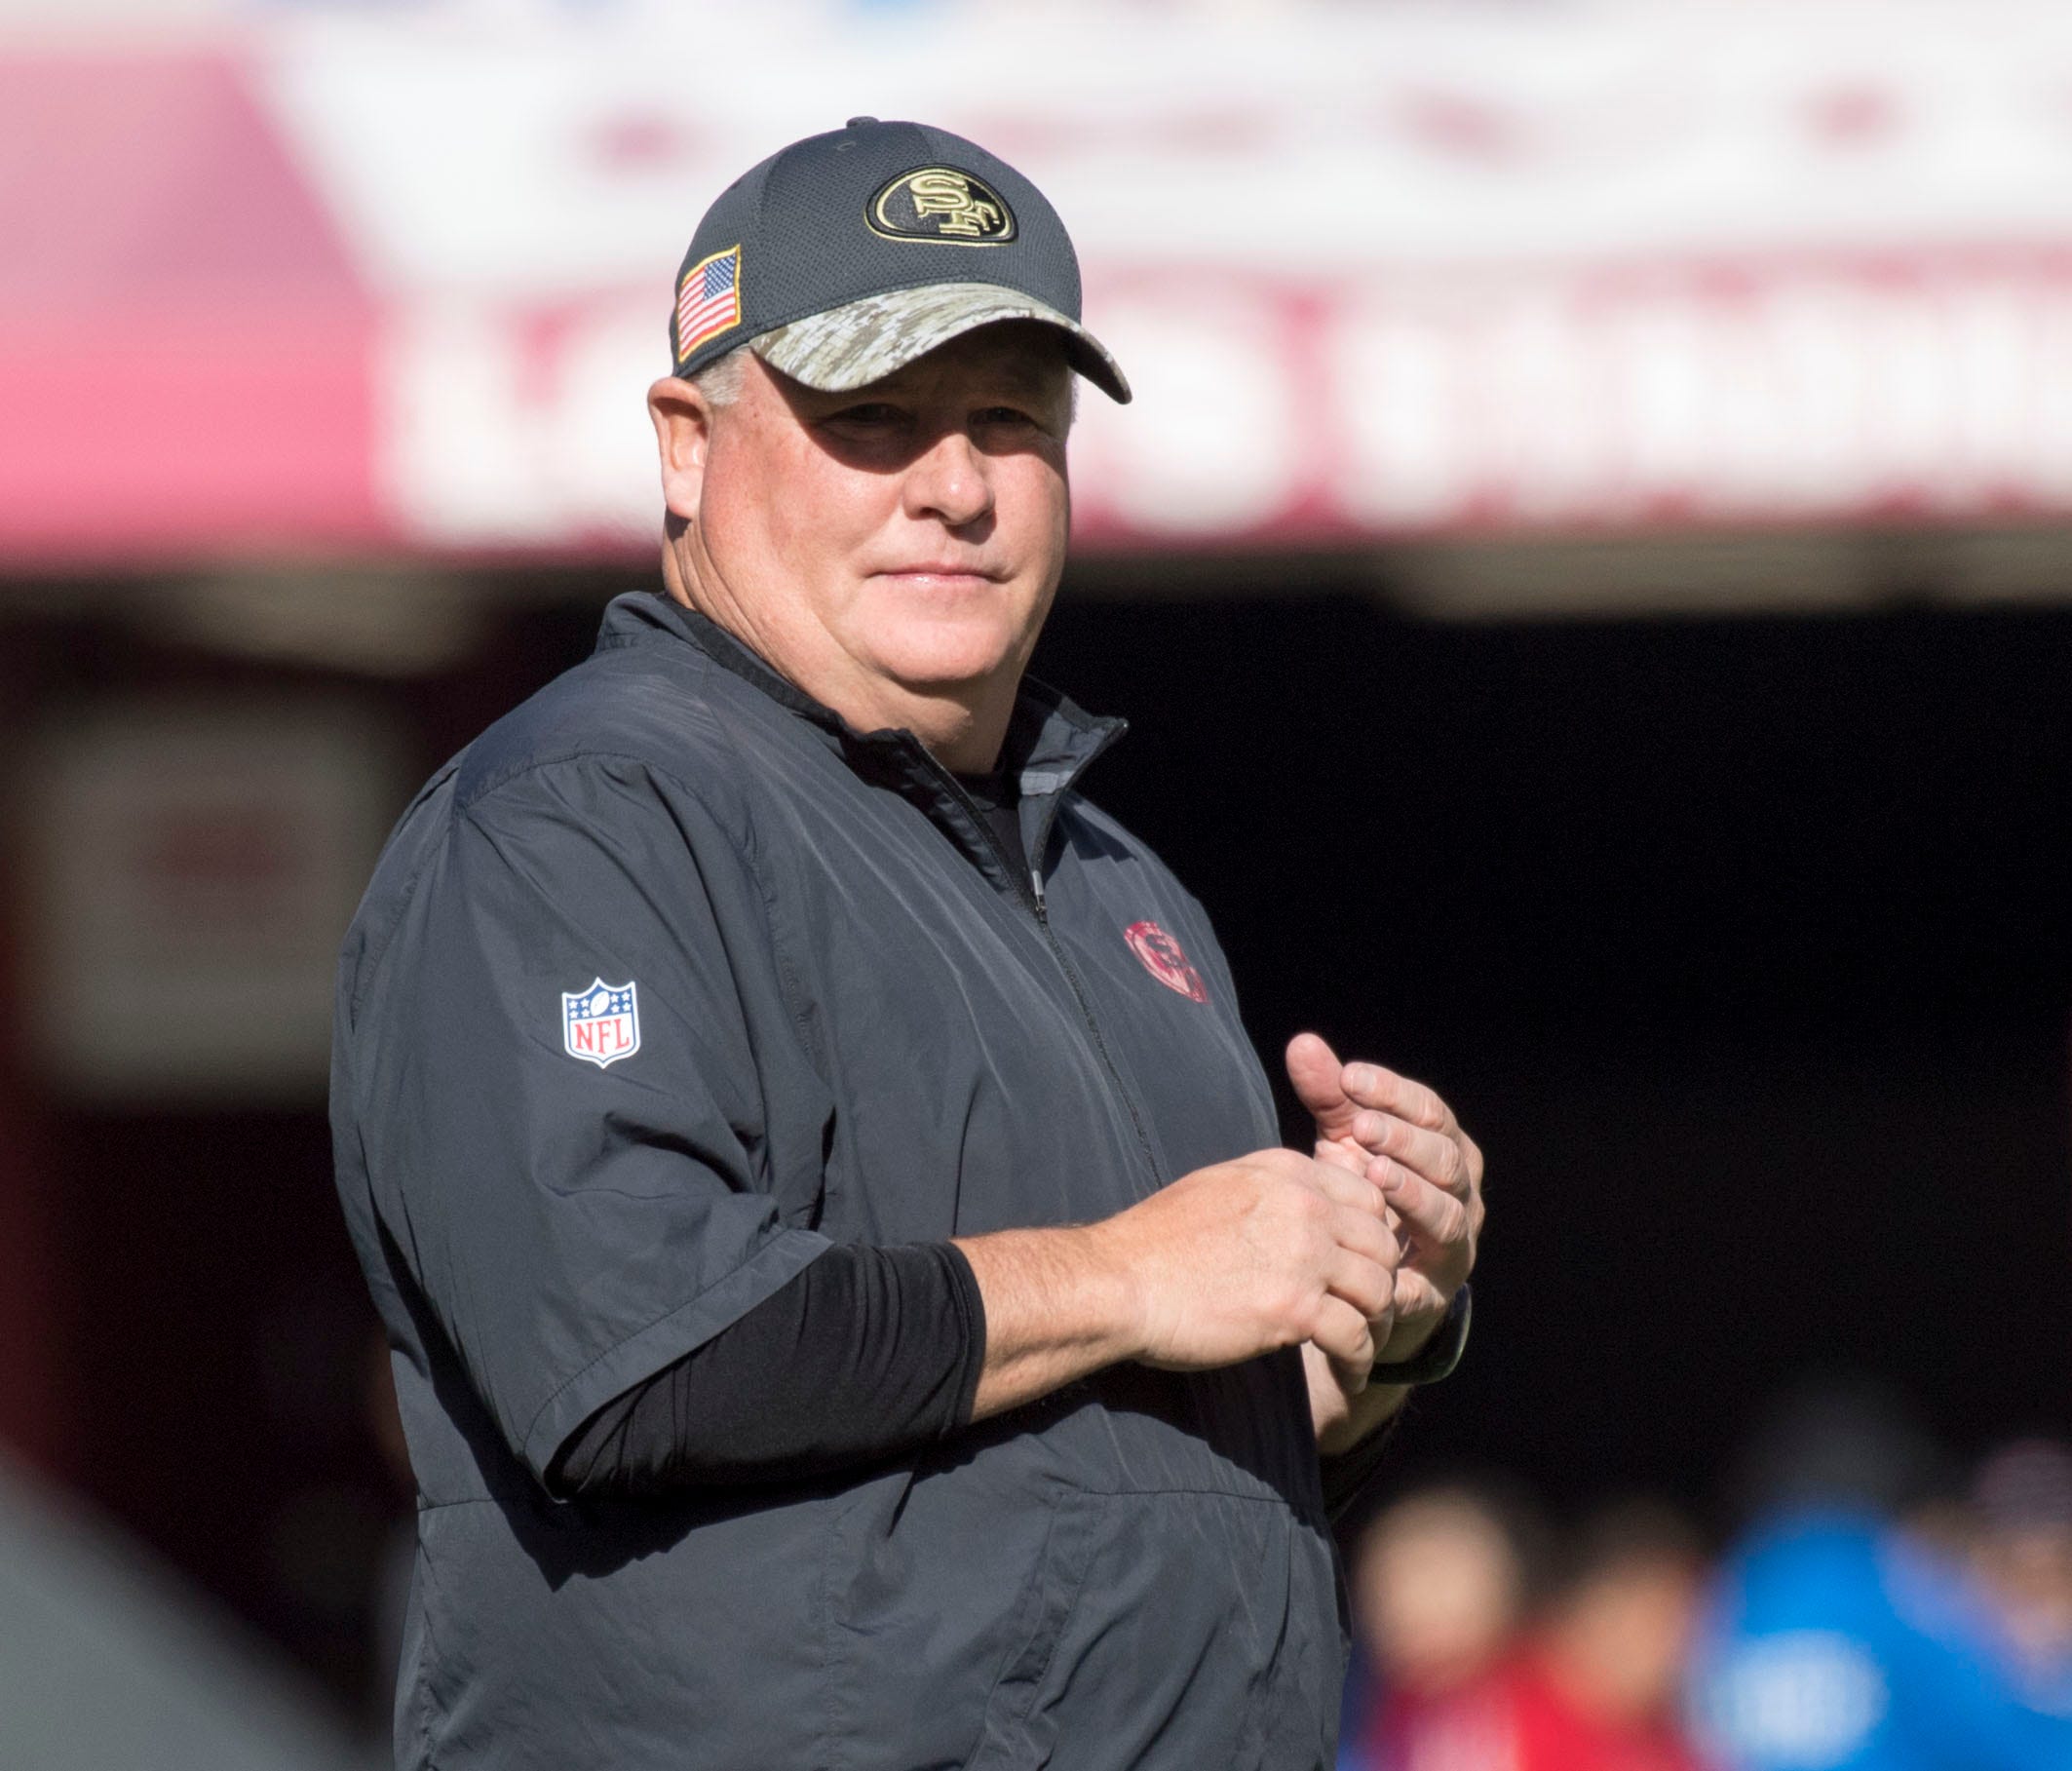 Chip Kelly coached four seasons in the NFL after a stint at Oregon.